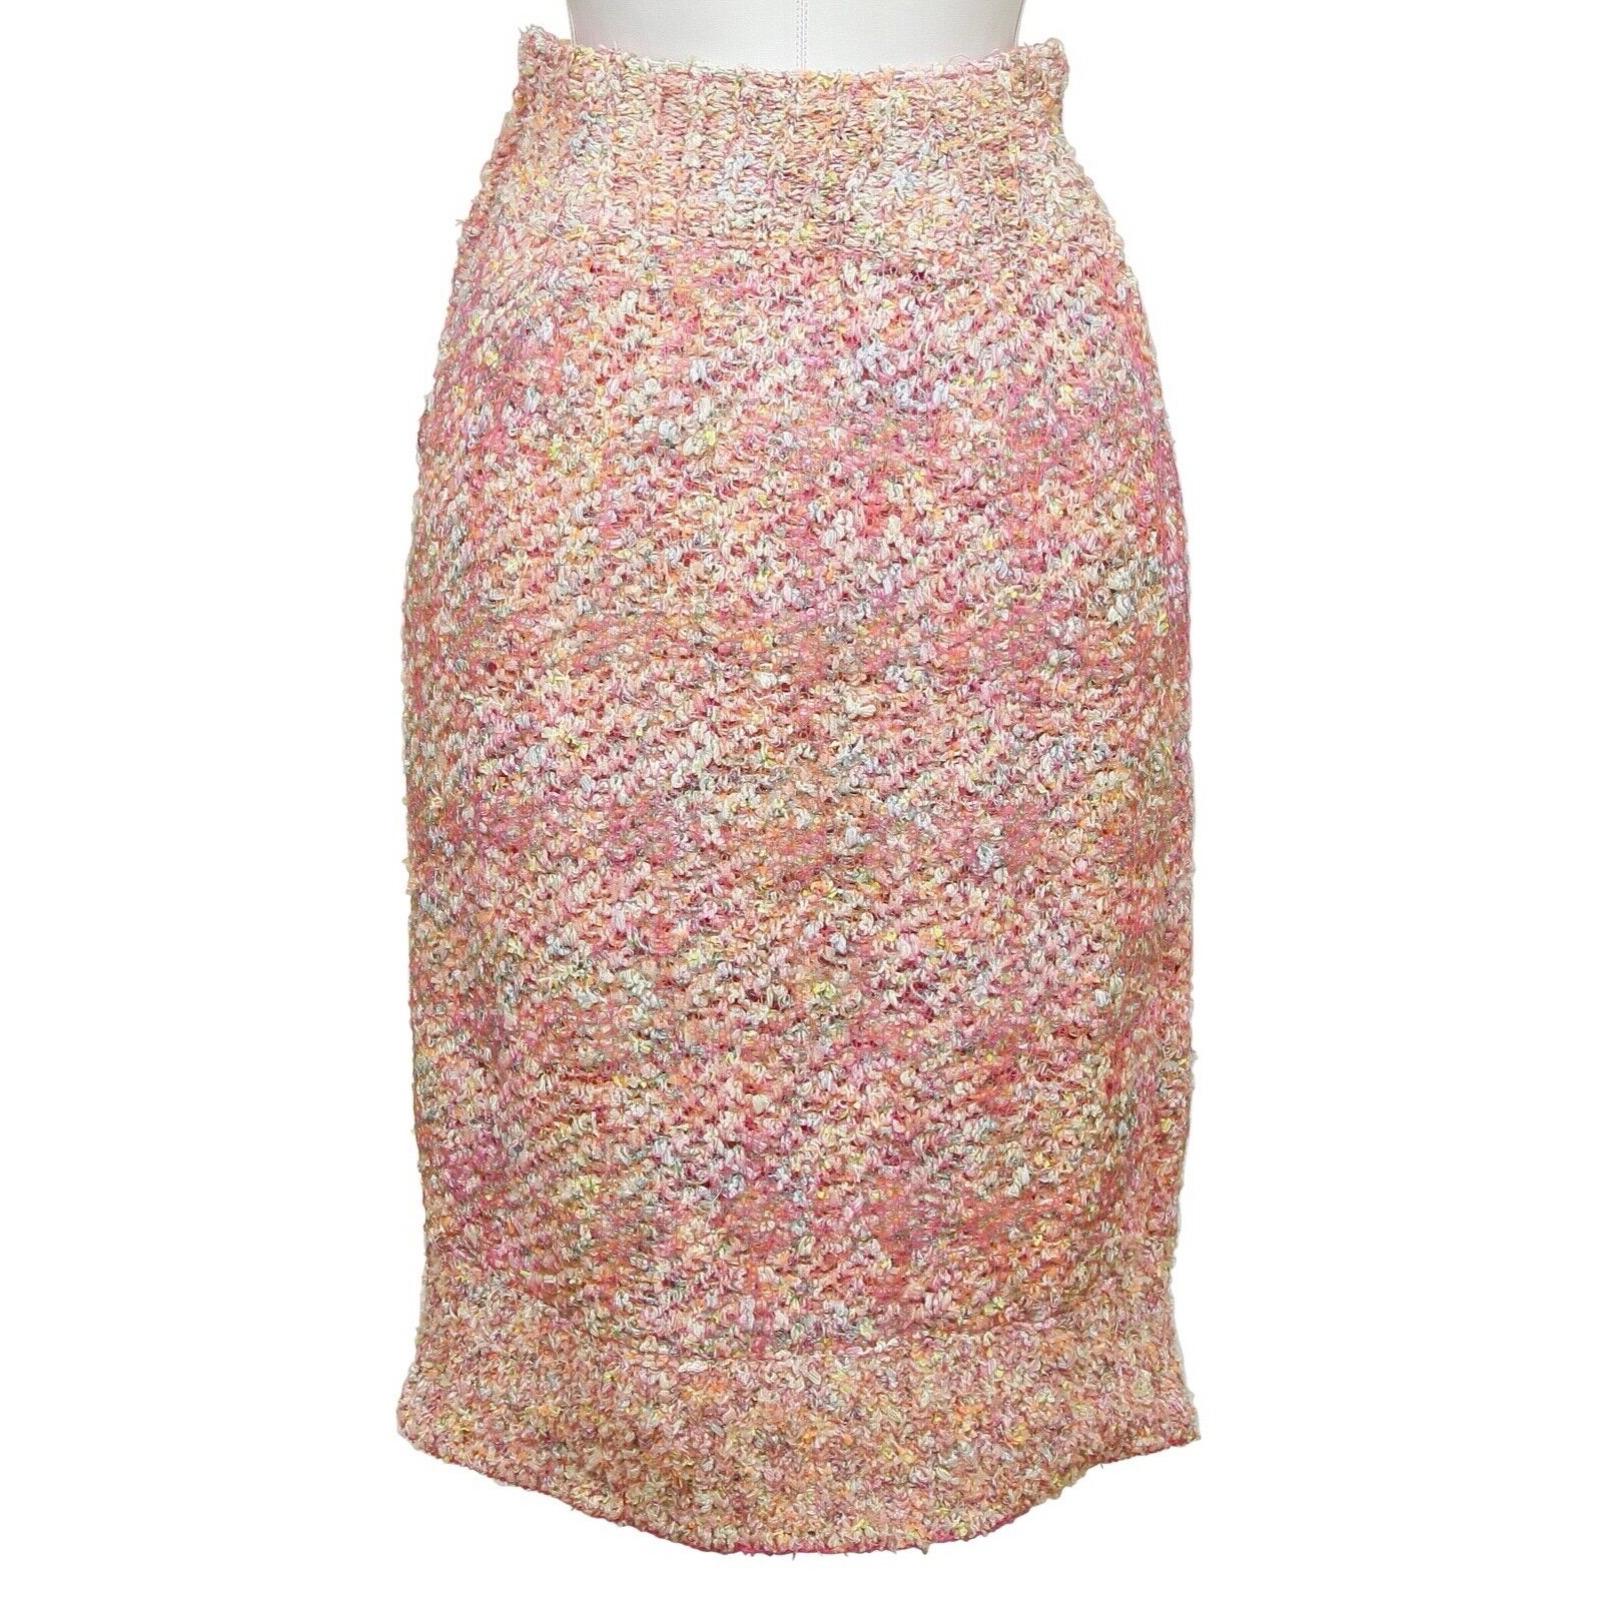 Beige CHANEL Skirt Tweed Fantasy Pink Multi-Color High Waisted Lined Sz 38